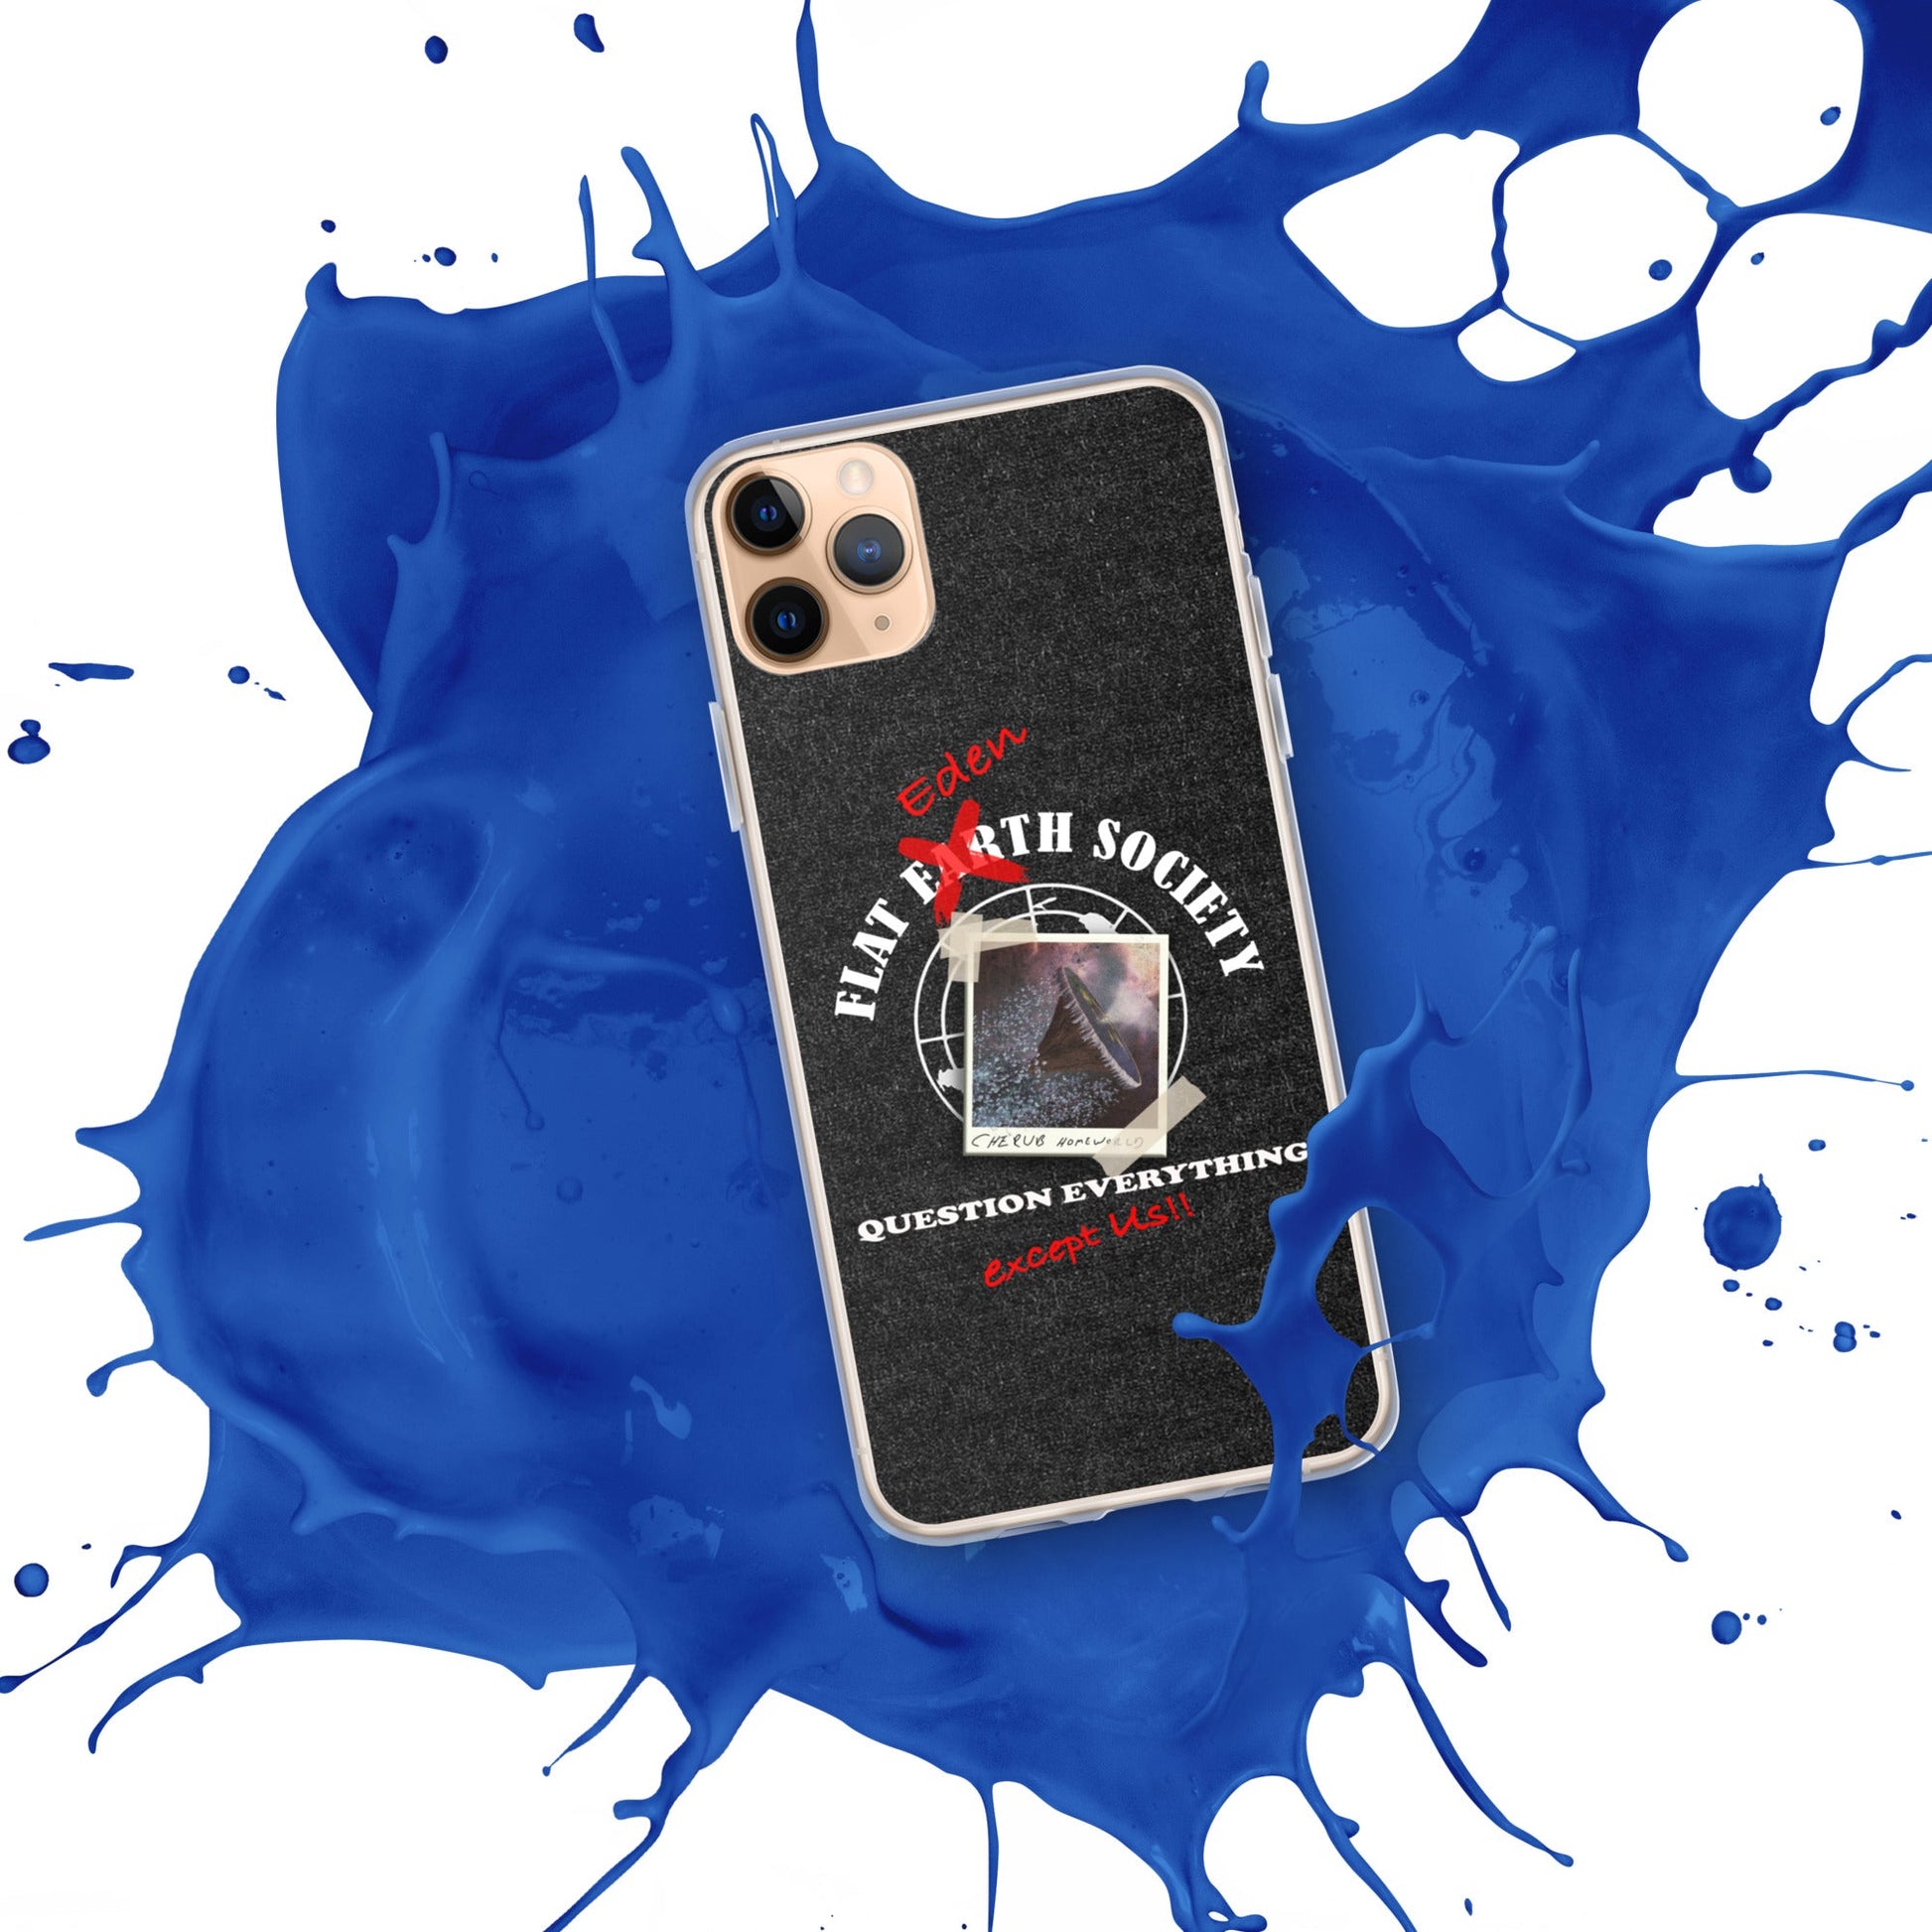 iPhone Case | Intergalactic Space Force 2 | Flat Eden Society - Spectral Ink Shop - Mobile Phone Cases -9780728_10996